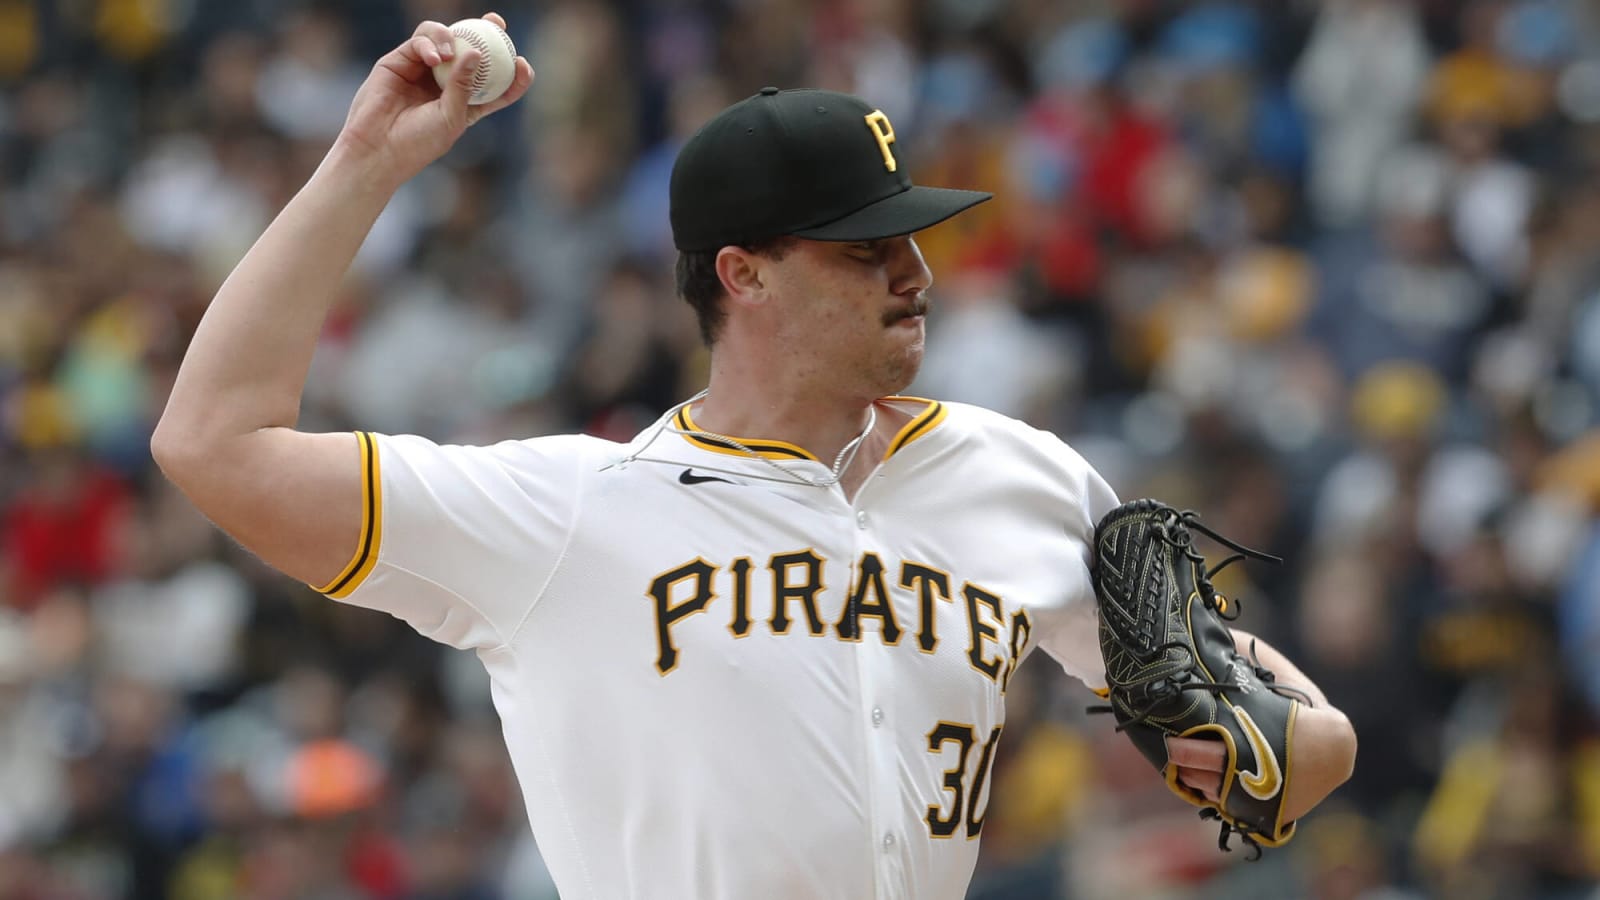 Will the Pirates Ever Get off the Treadmill of Mediocrity?